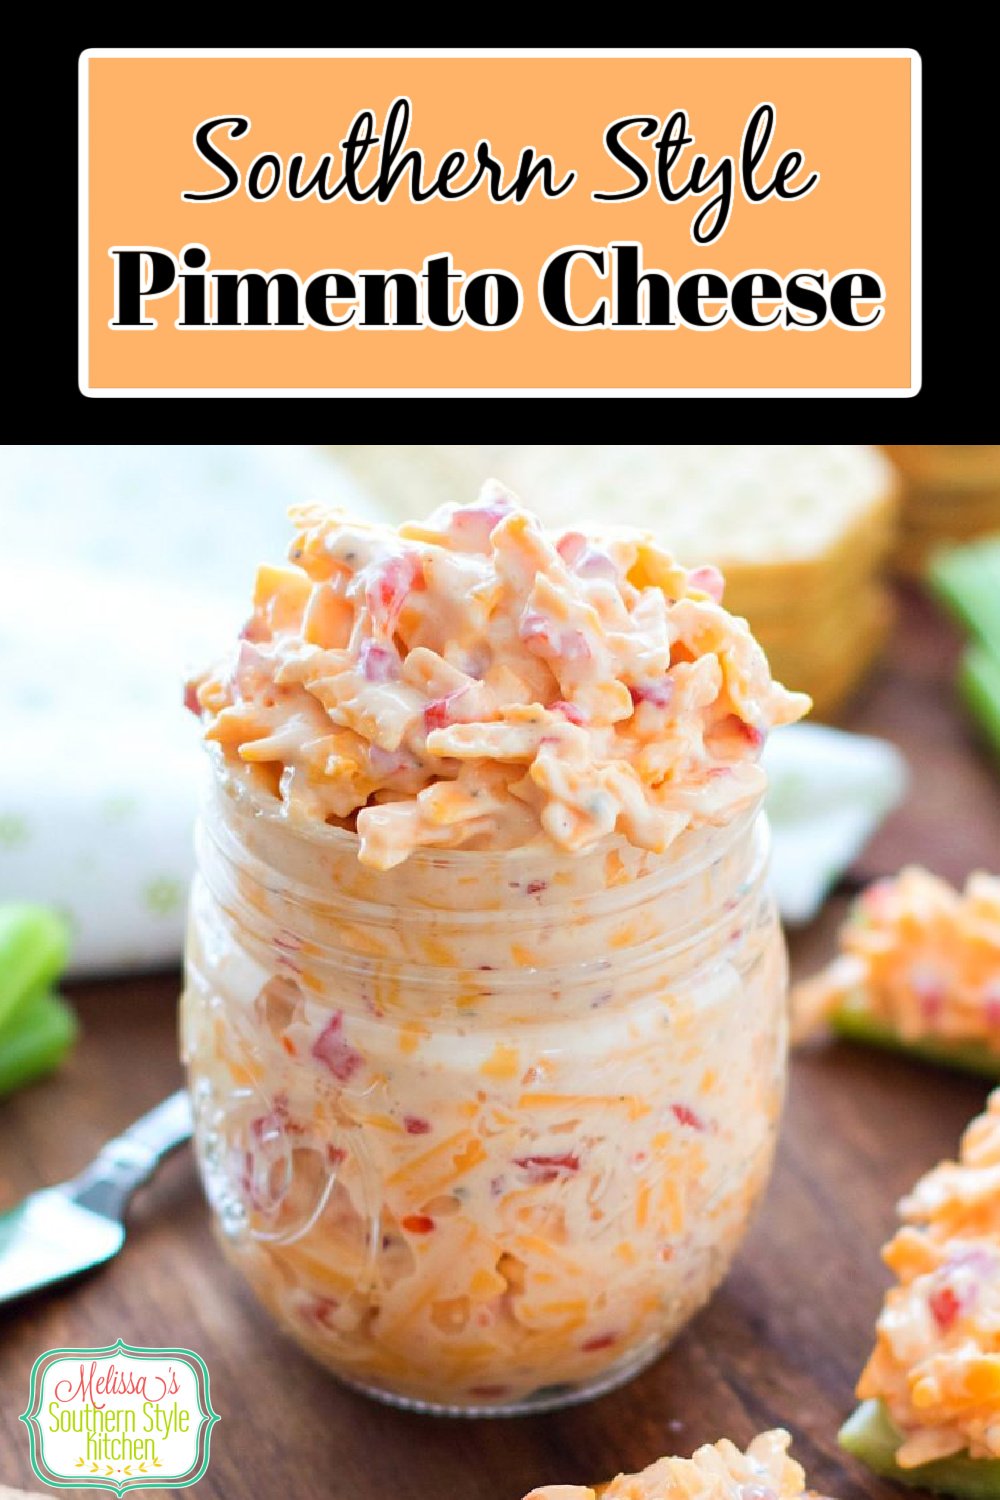 Whip-up a batch of Southern Pimento Cheese for light meals and snacking #pimentocheese #cheese #pimentos #cheesy #appetizer #snacks #pimientocheese #southernpimentocheese #southernfood #southernrecipes #cheese #cheddarcheese #vegetarian via @melissasssk